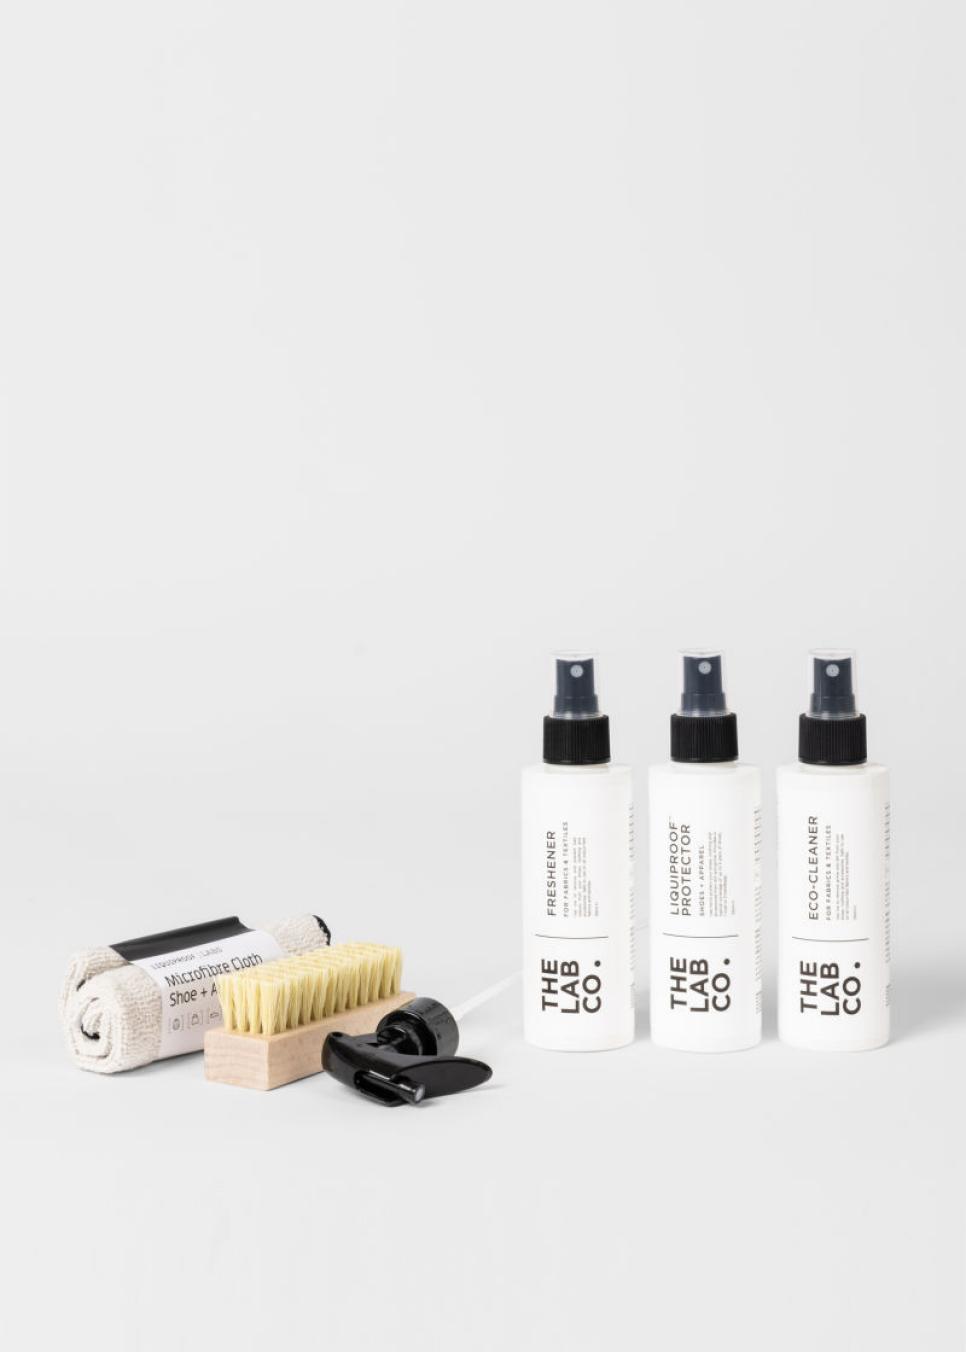 Paul Smith The Lab Co. Footwear Care Kit